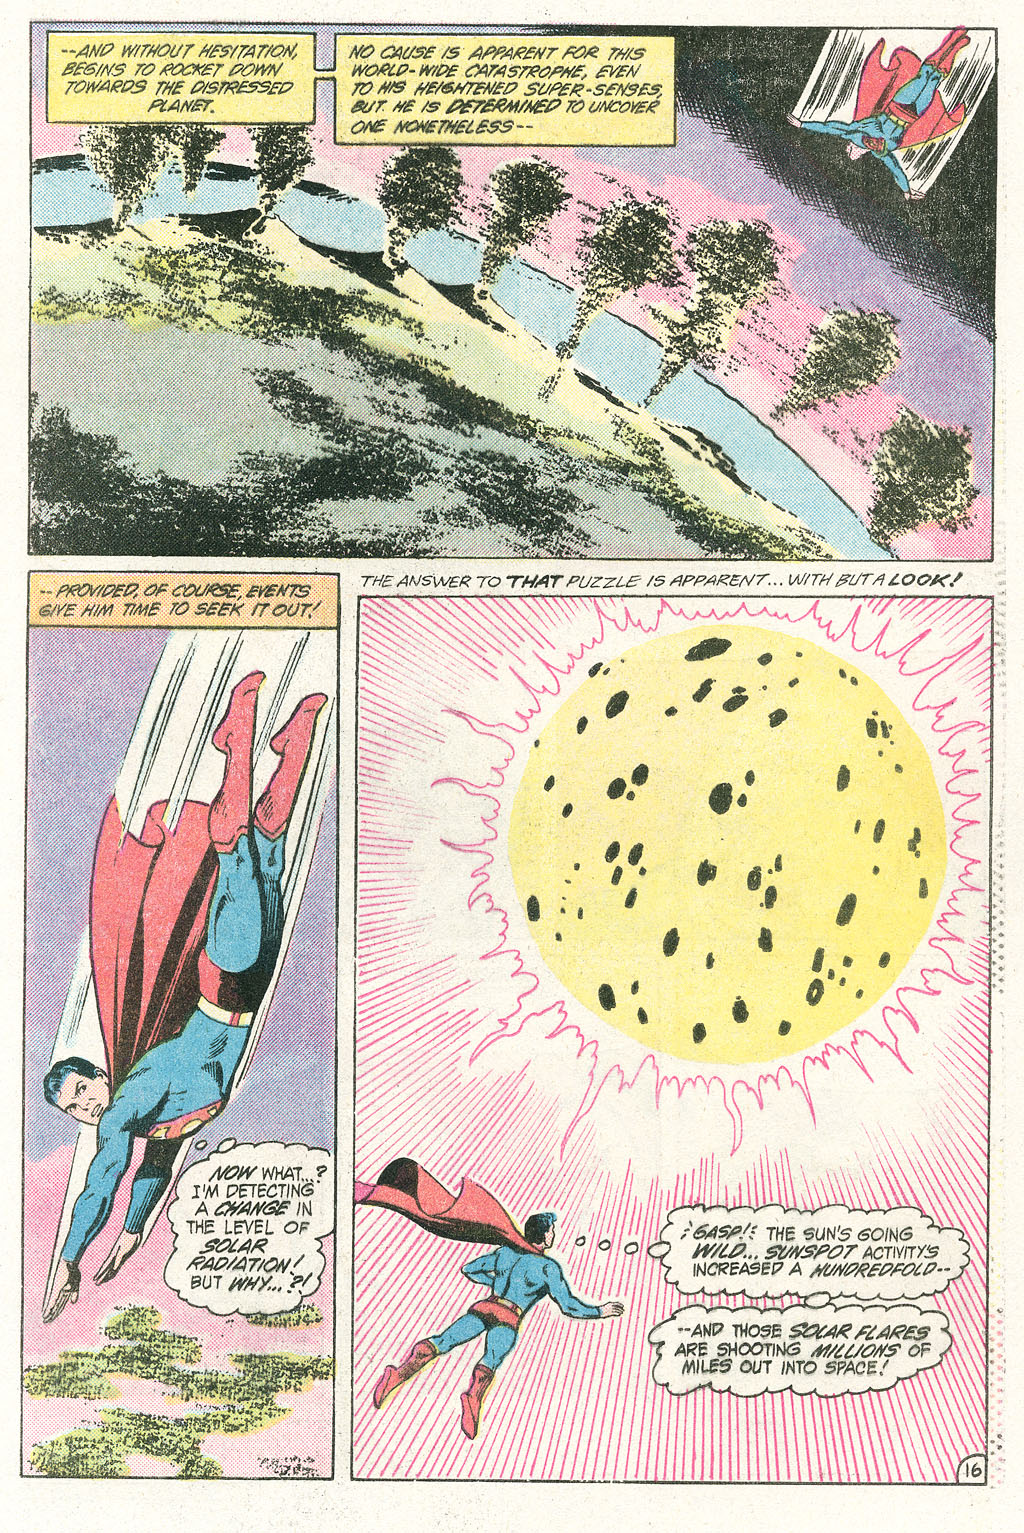 The New Adventures of Superboy 54 Page 20